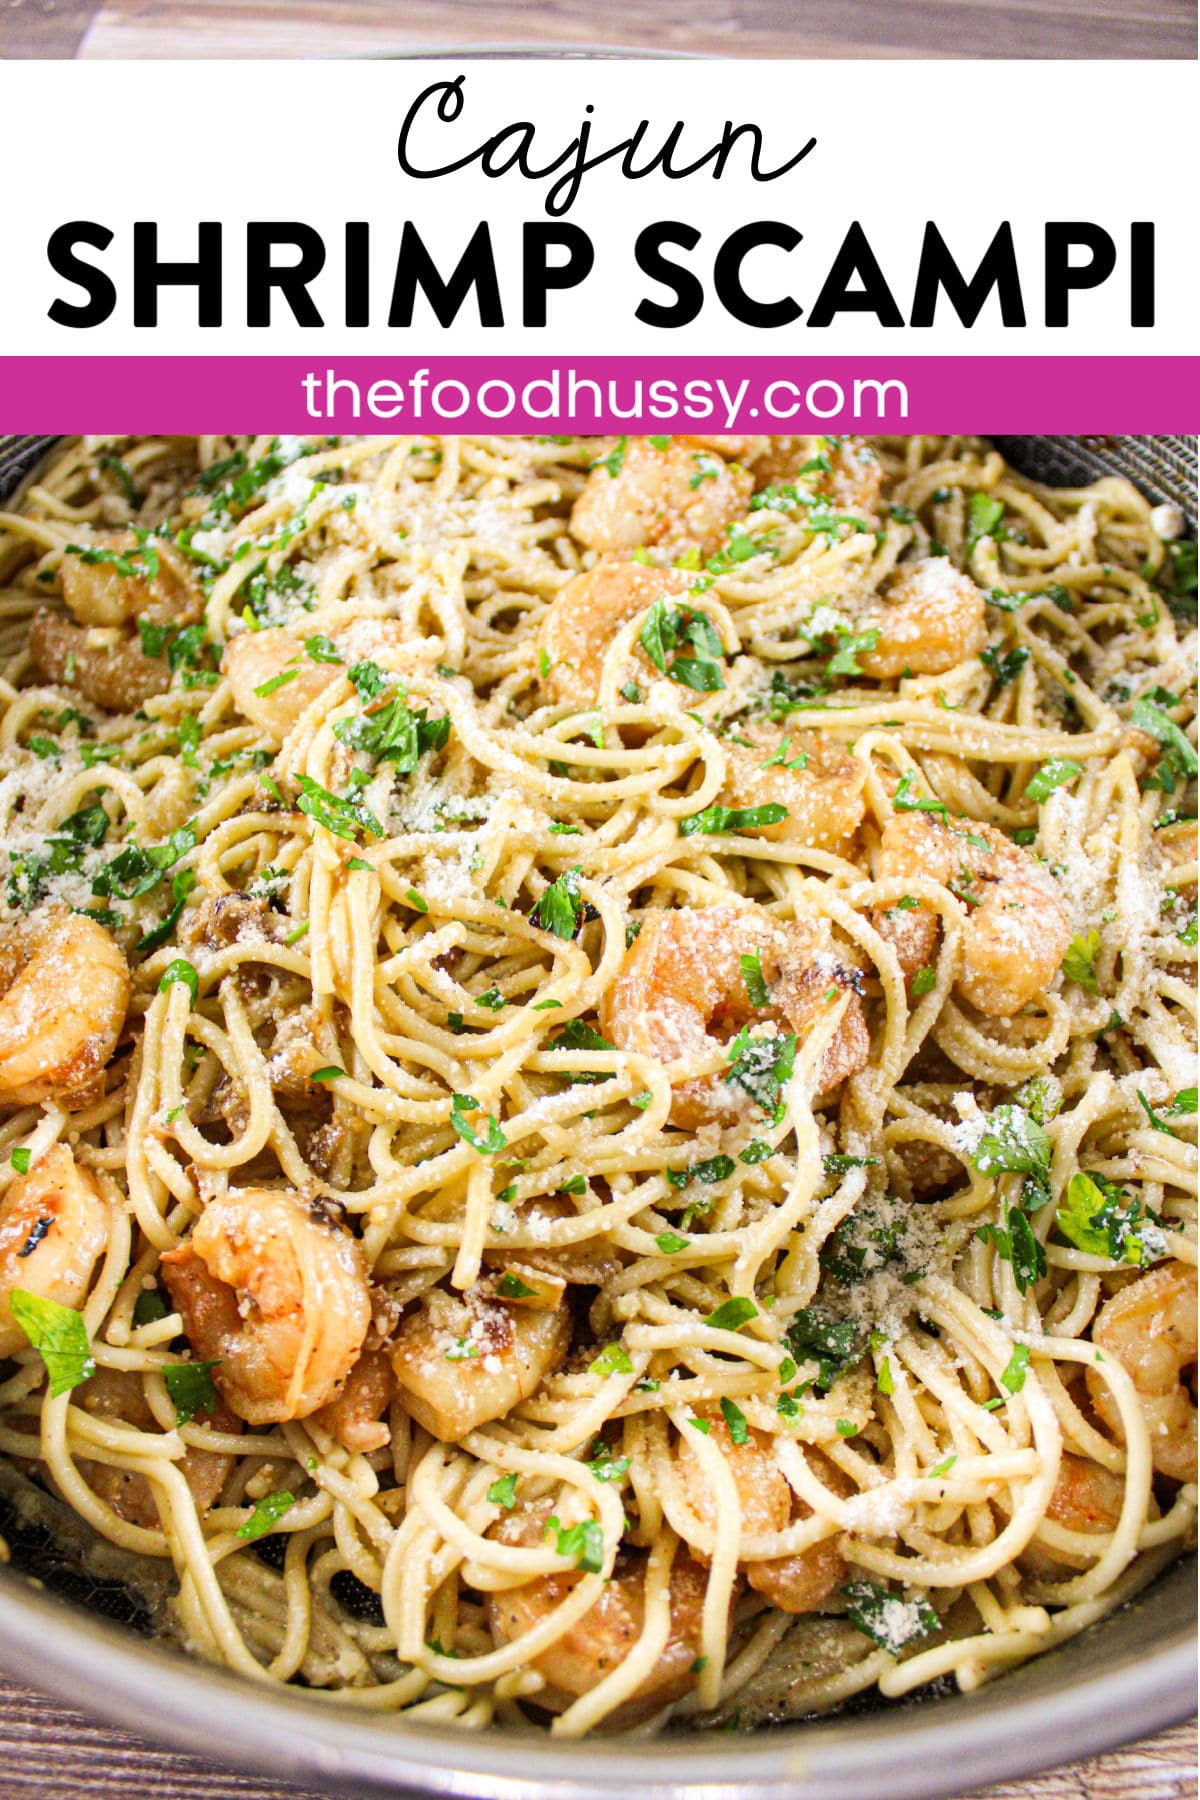 Cajun Shrimp Scampi is creamy, garlicky and just a little spicy! Scampi style shrimp over spaghetti in a delicious light cream sauce. Plus - it's a quick dinner - ready in less than 15 minutes.  via @foodhussy